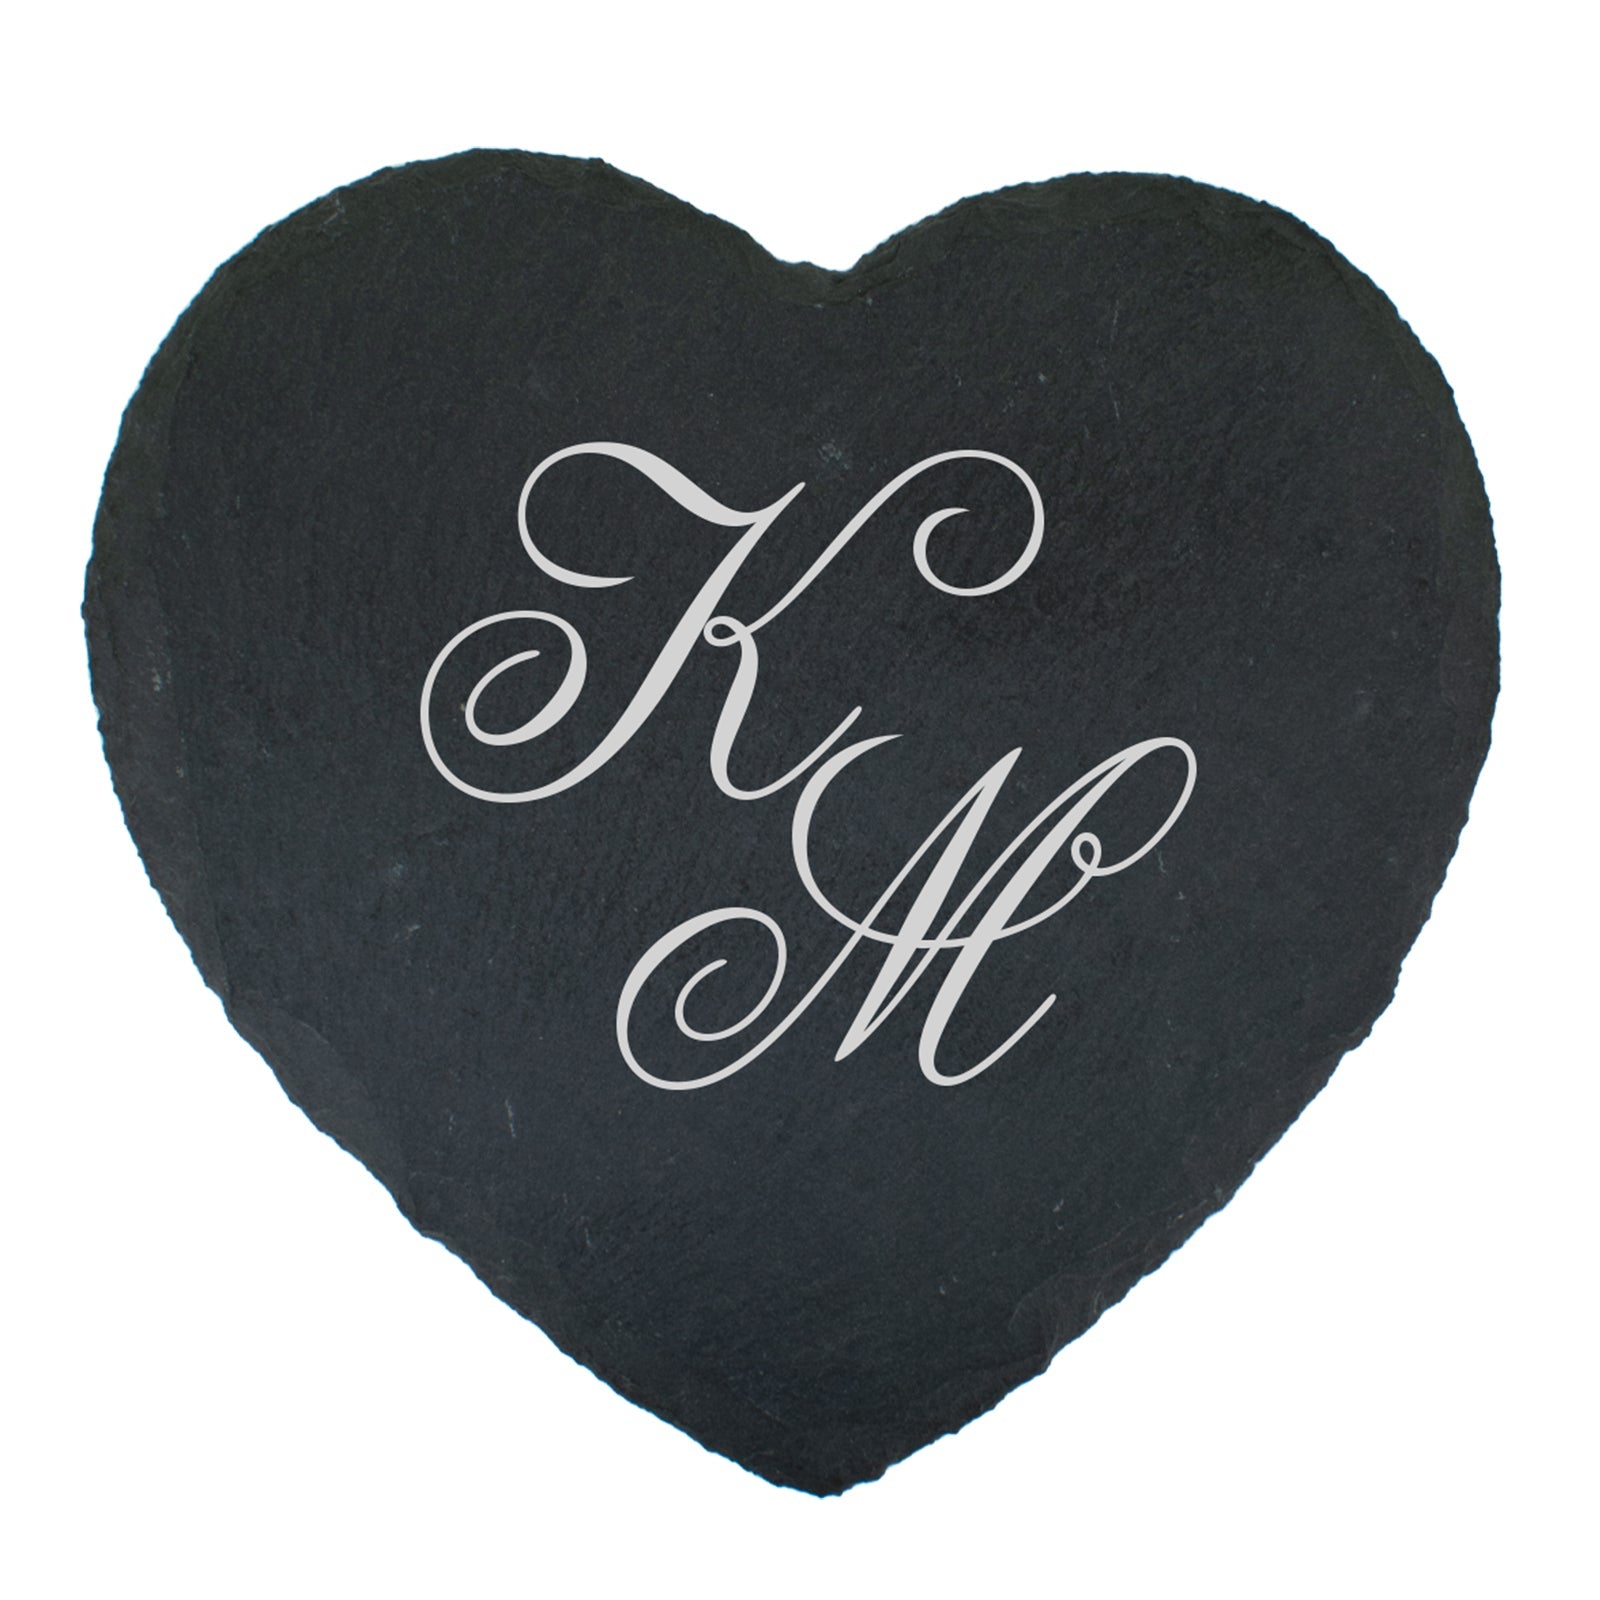 Heart Shaped Slate Coaster - Perfect Gift - Duos